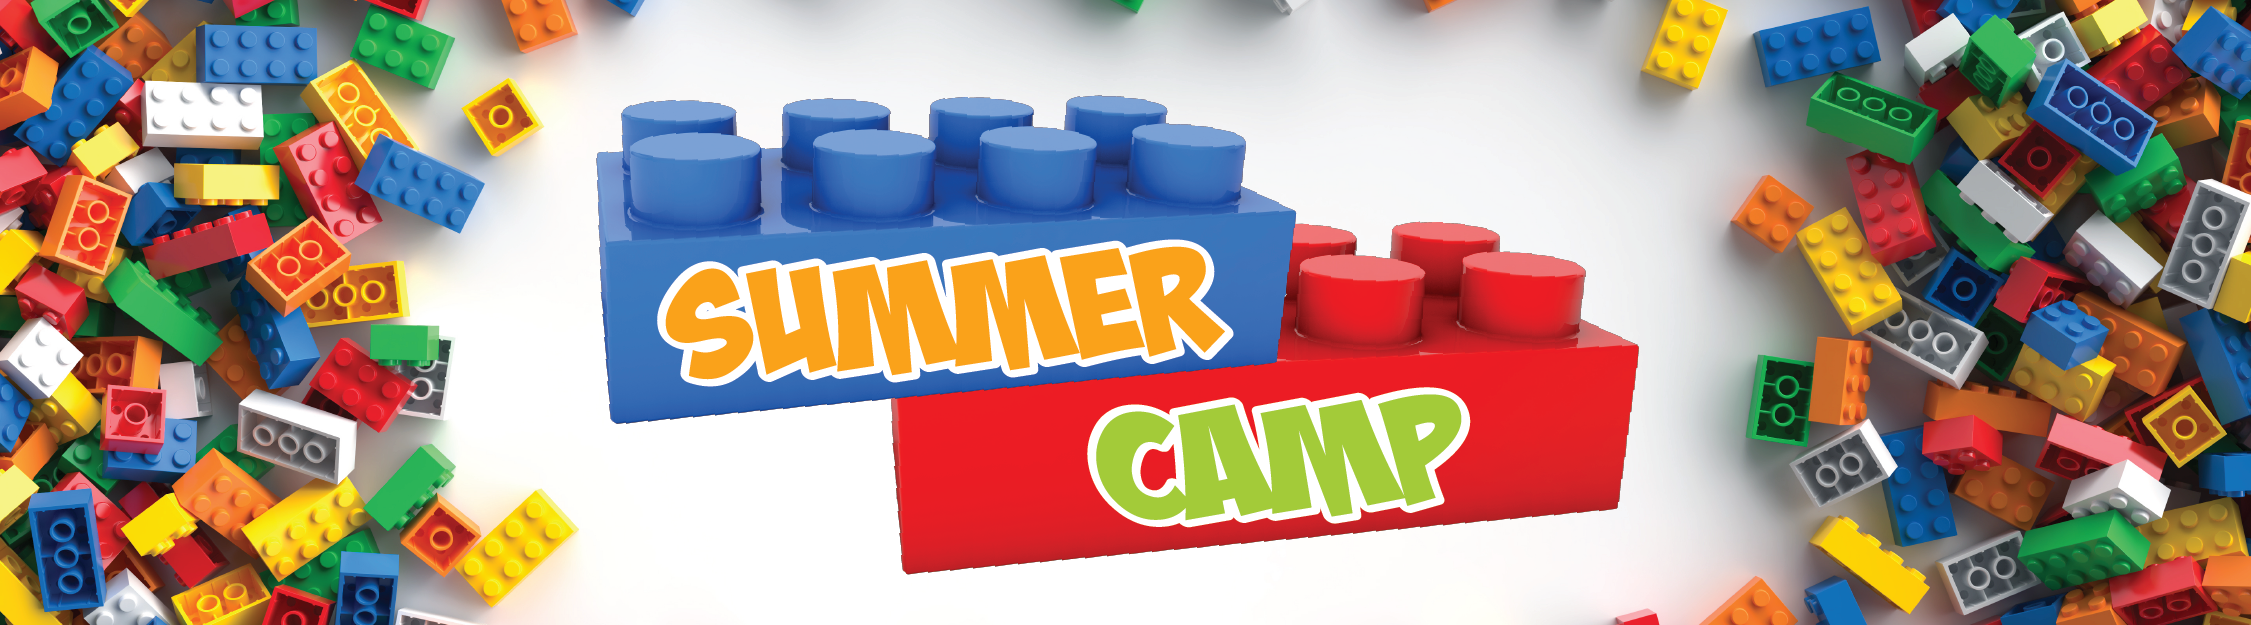 Summer Camp Store